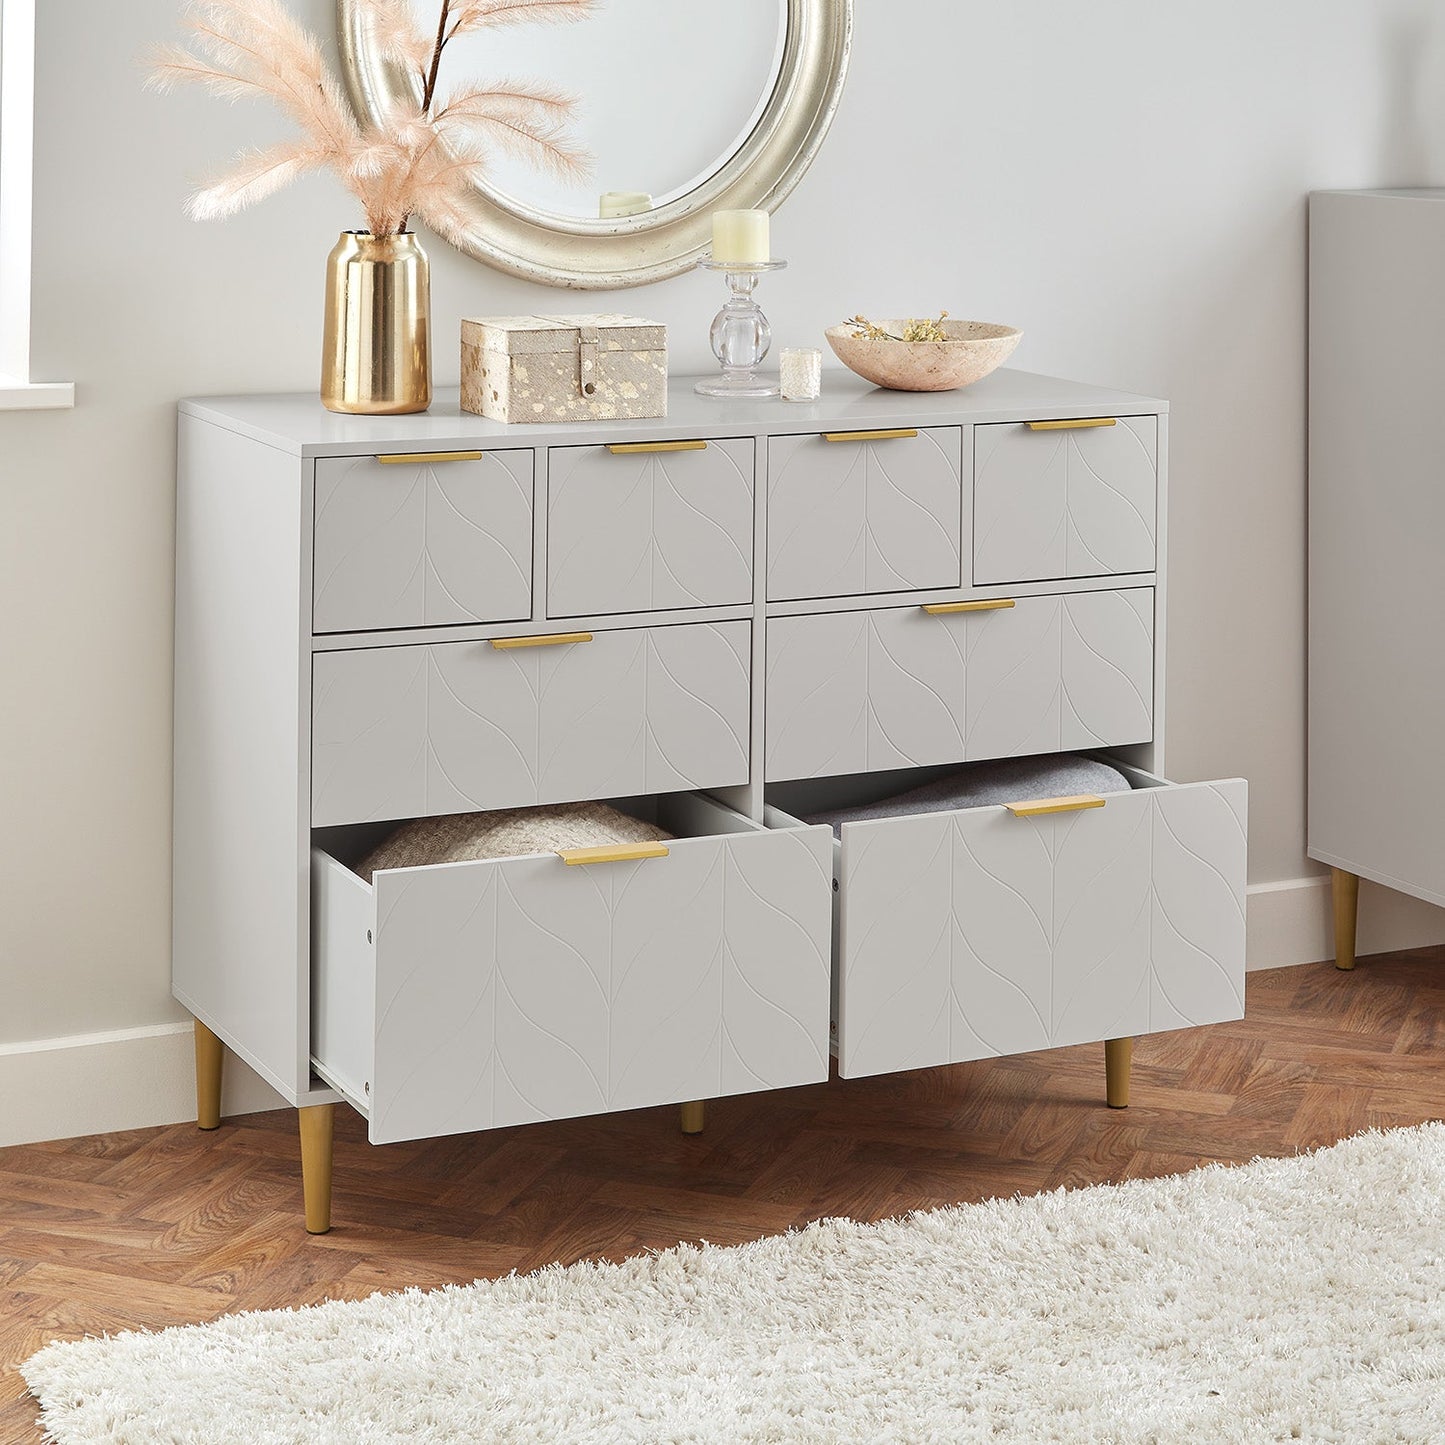 Gloria 4 piece bedroom furniture set - 4 over 4 chest of drawers - grey - Laura James